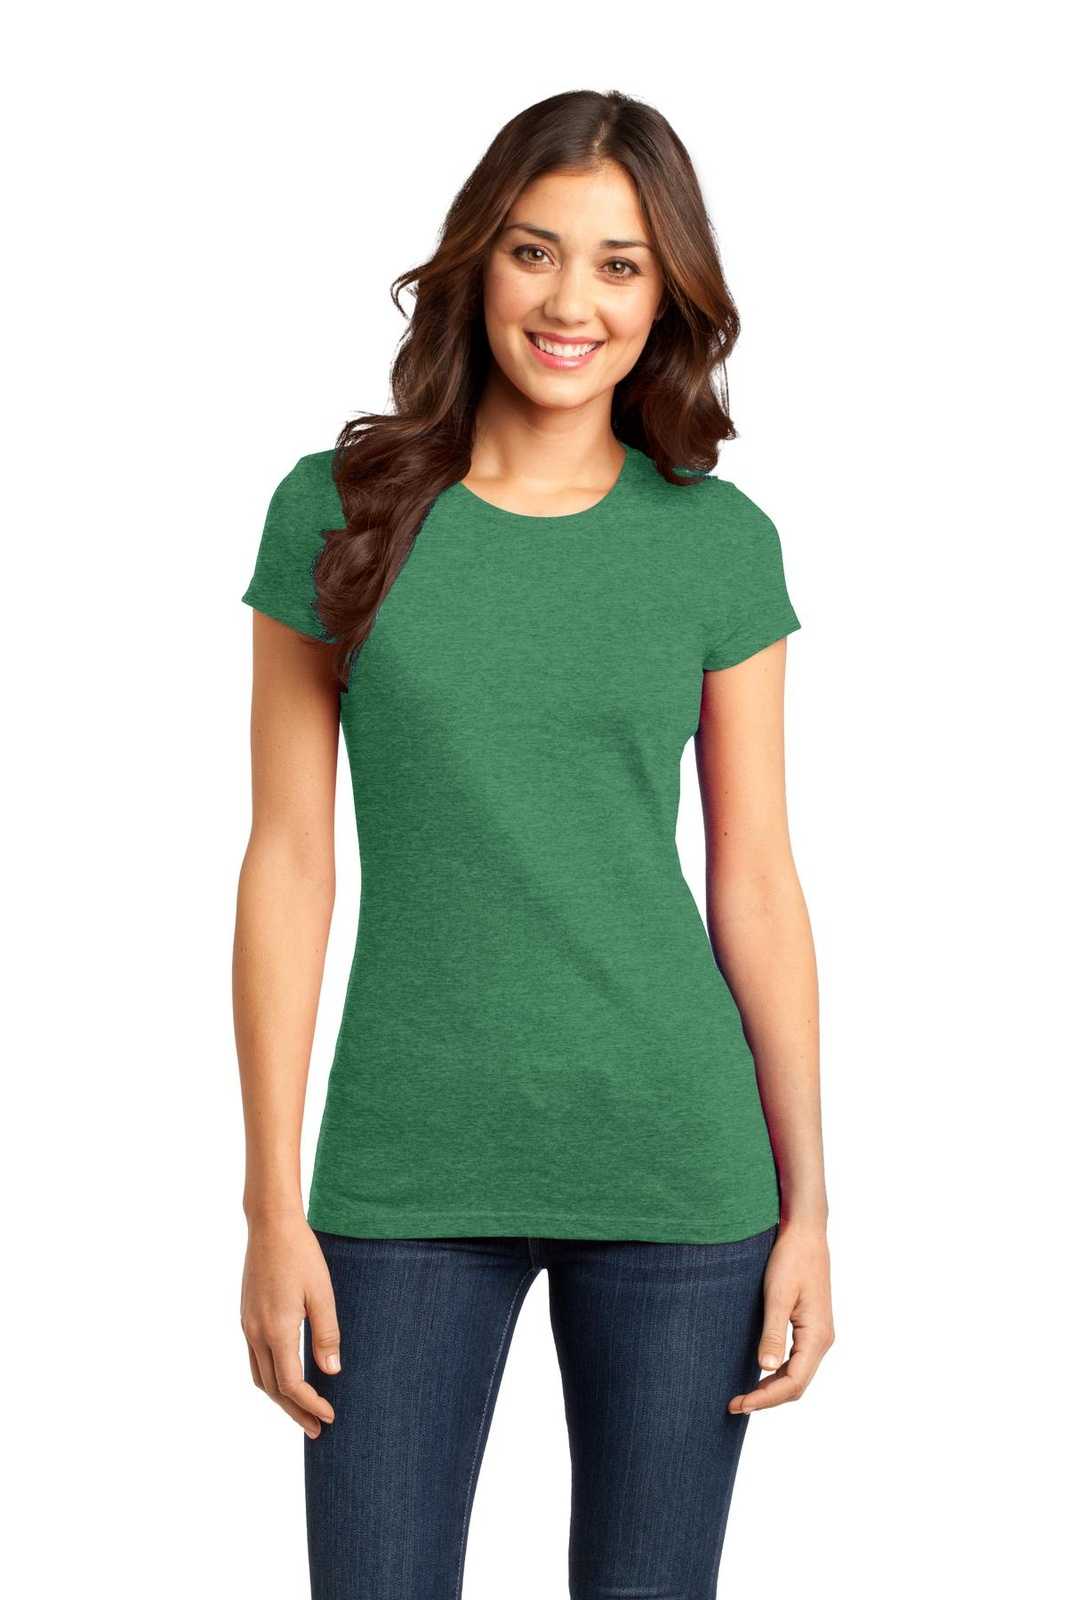 District DT6001 Women's Fitted Very Important Tee - Heathered Kelly Green - HIT a Double - 1